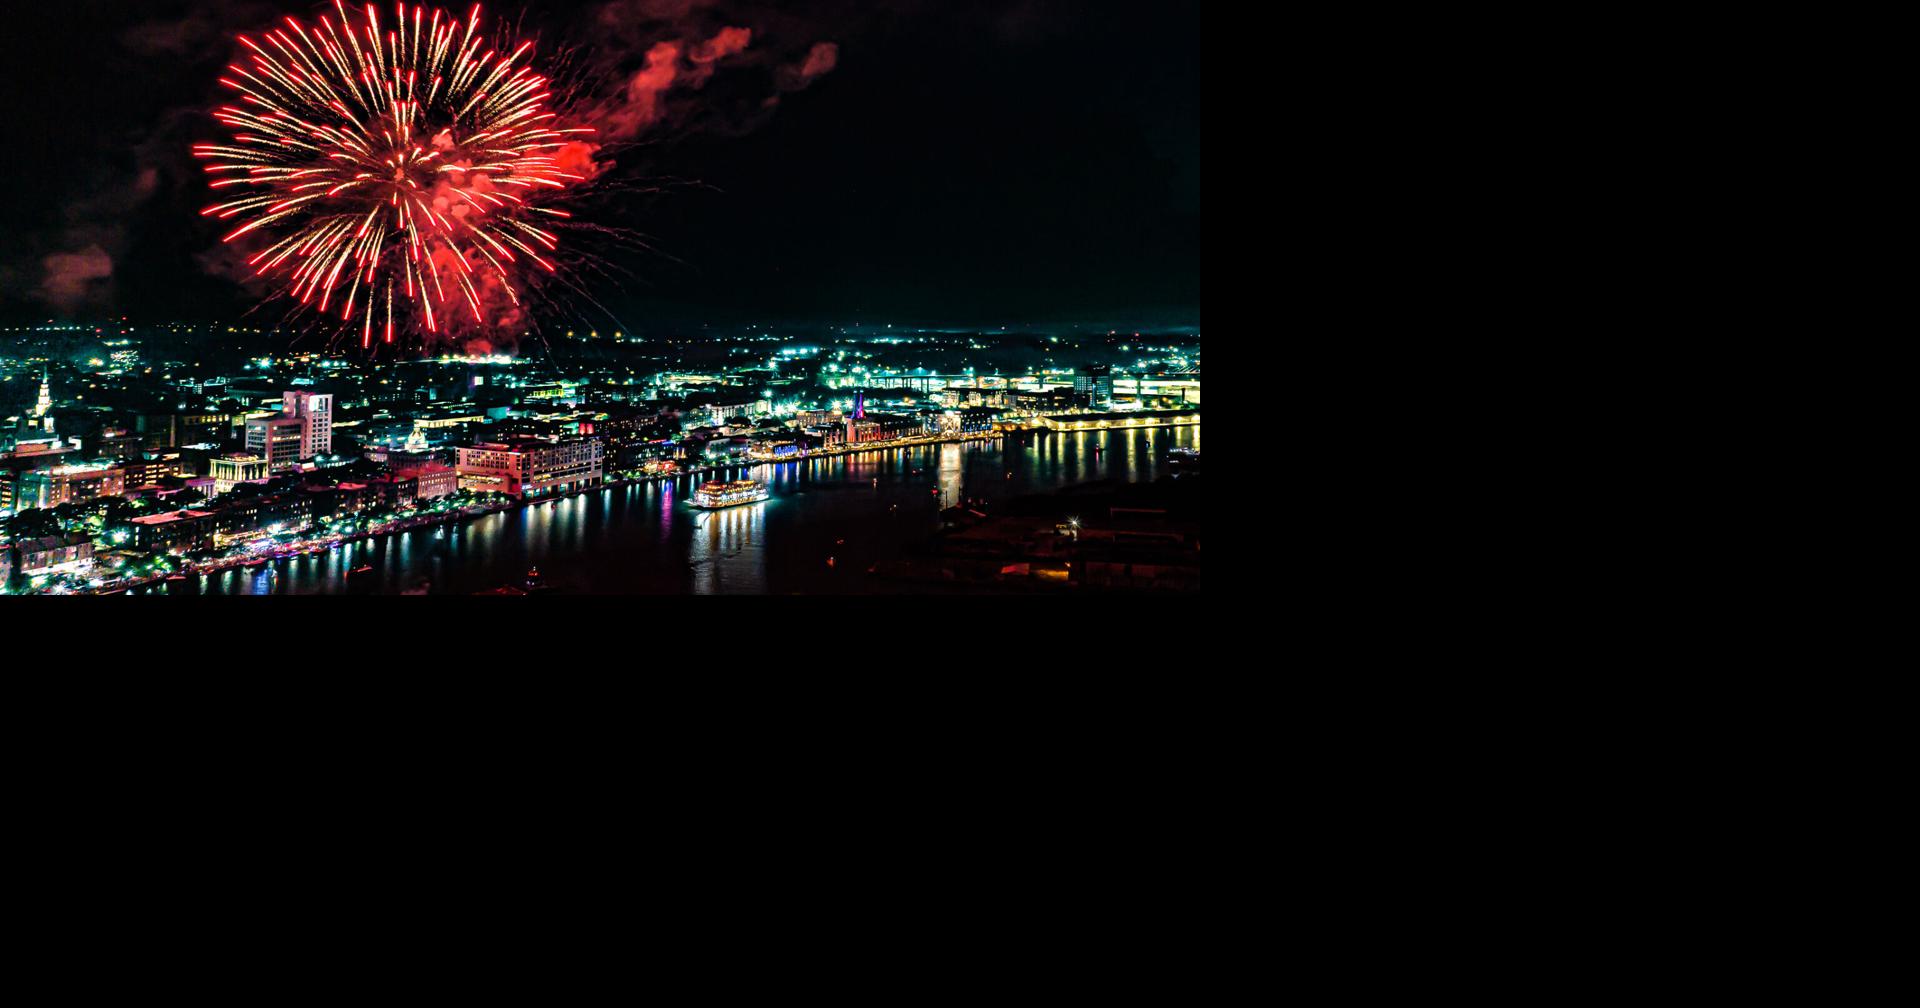 July 1 – Savannah Waterfront Celebrates Independence Day |  Leisure industry